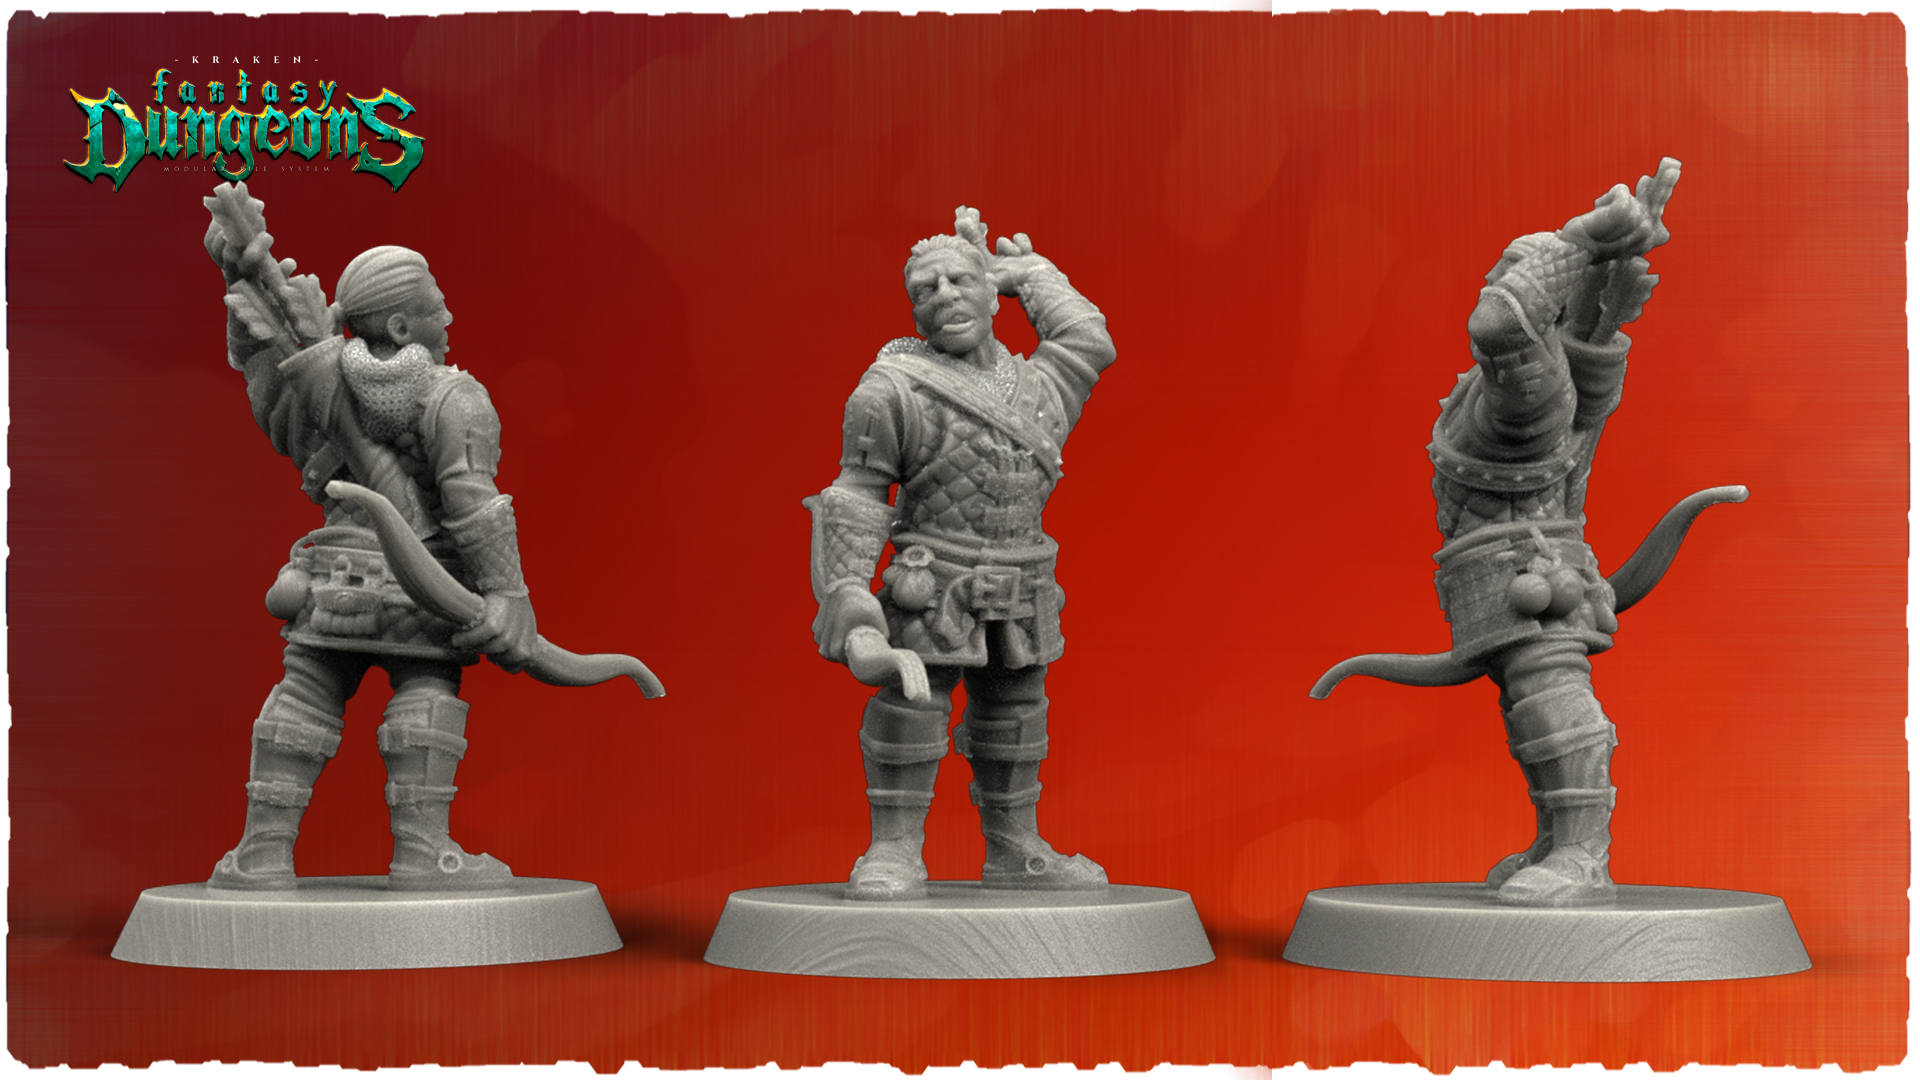 Changeling Rogue - Satada Dungeons and Dragons Miniature DnD is a